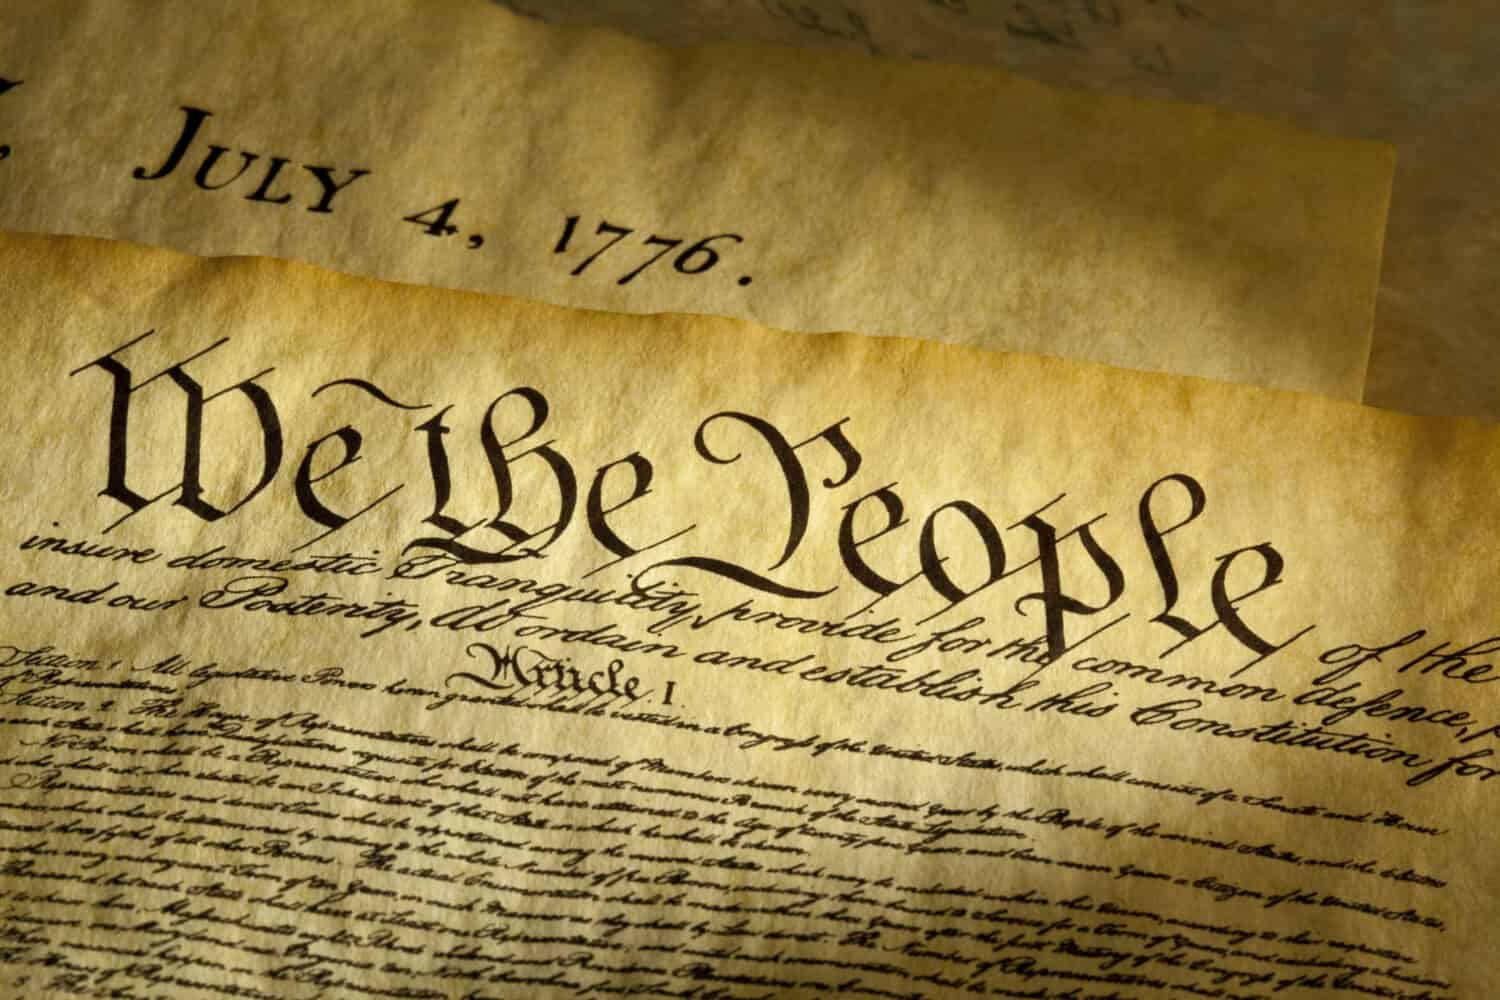 We the People are the opening words of the preamble to the Constitution of the USA. The document underneath is a copy of the Declaration of Independence with the date, July 4, 1776 showing.  